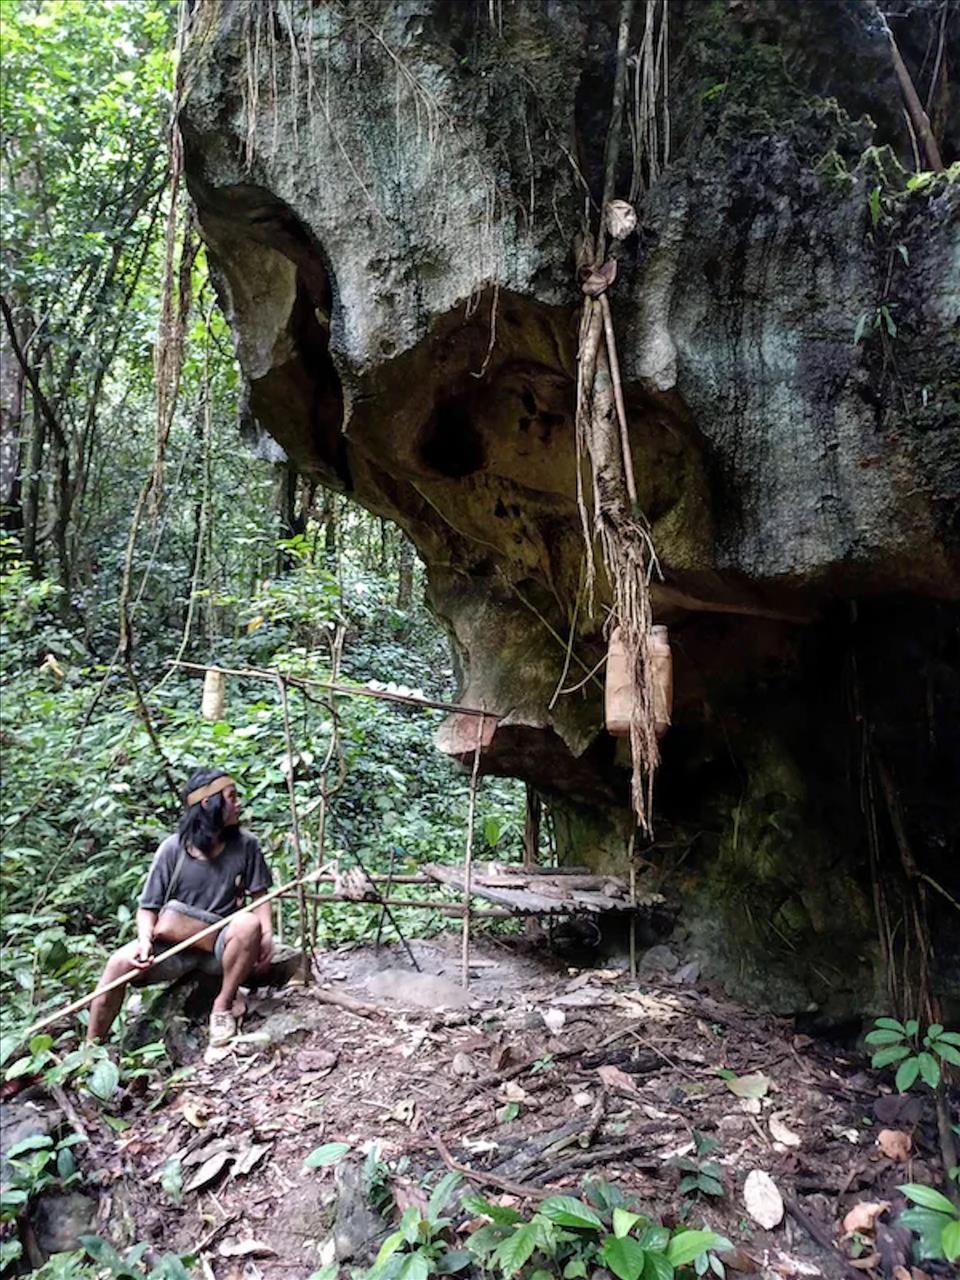 New Genetic Research Uncovers The Lives Of Bornean Hunter-Gatherers